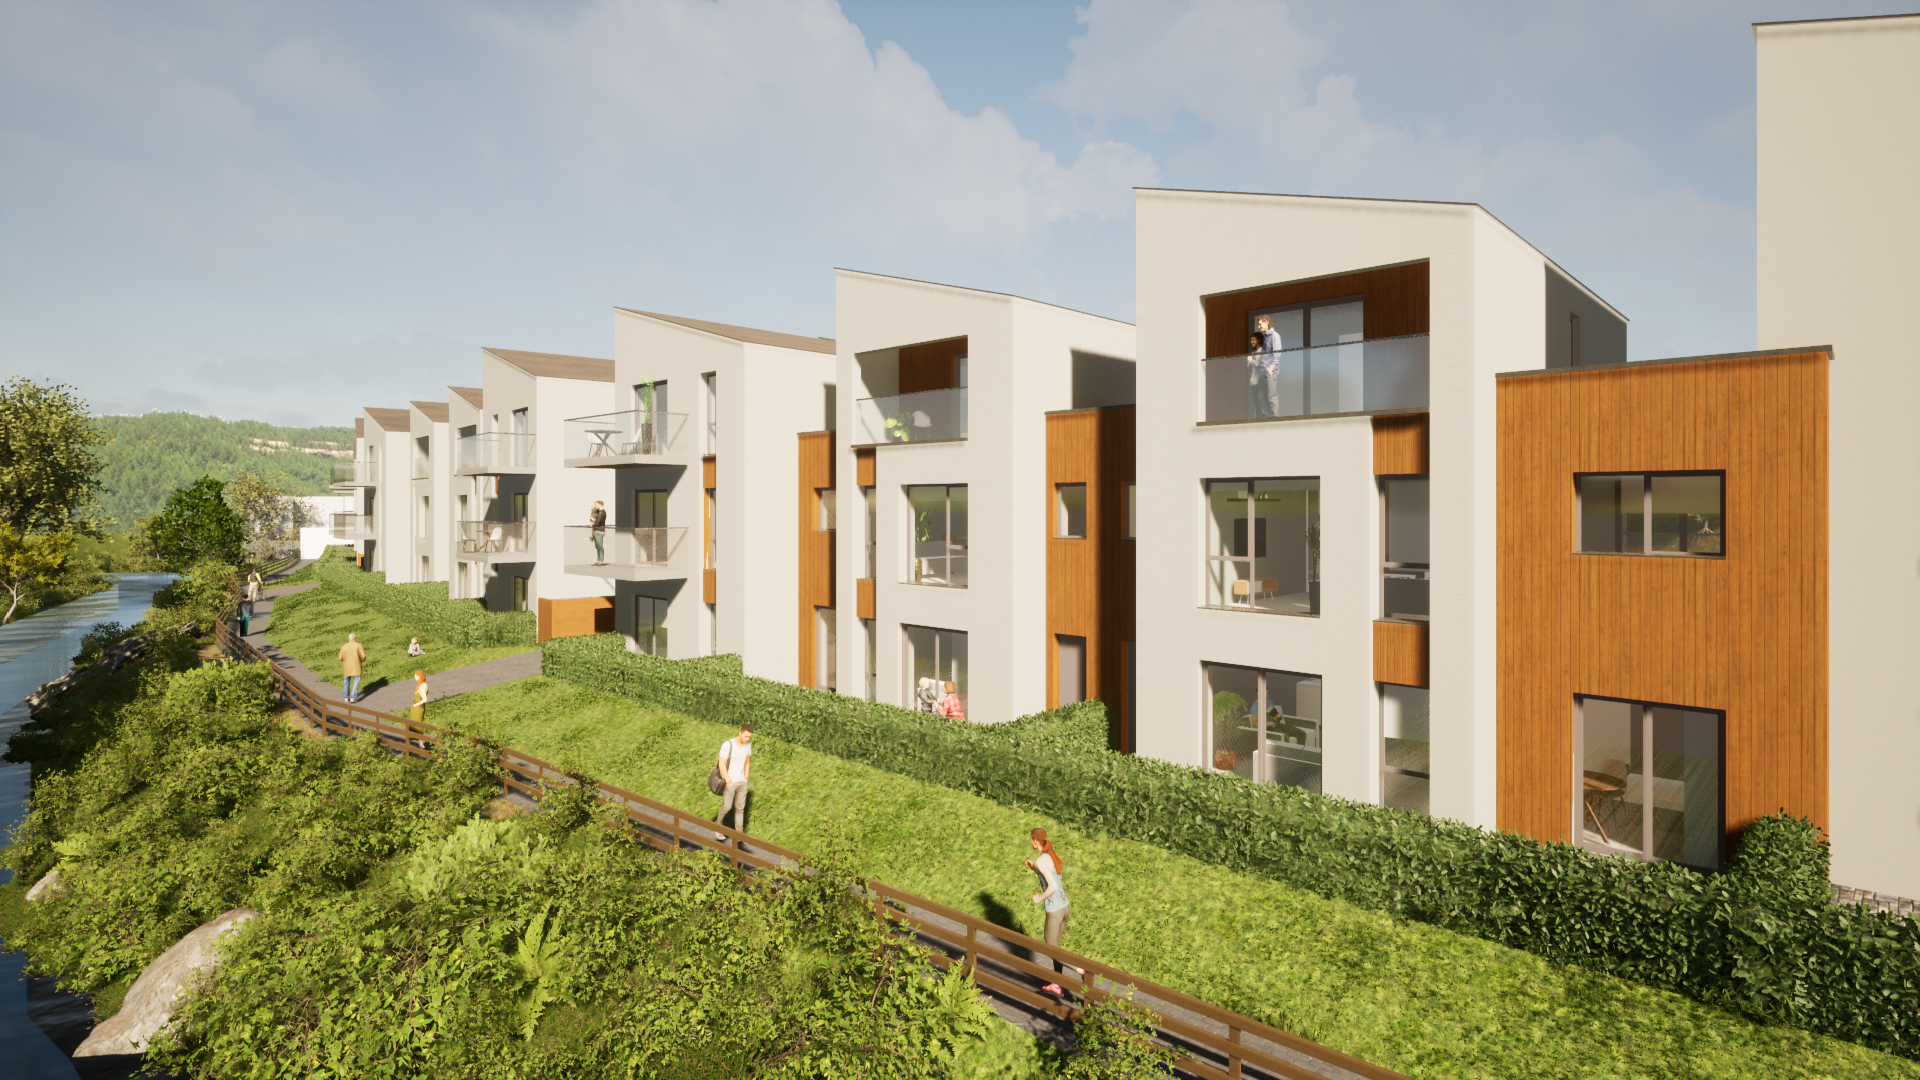 Plans for a residential development at Riverstown, Glanmire